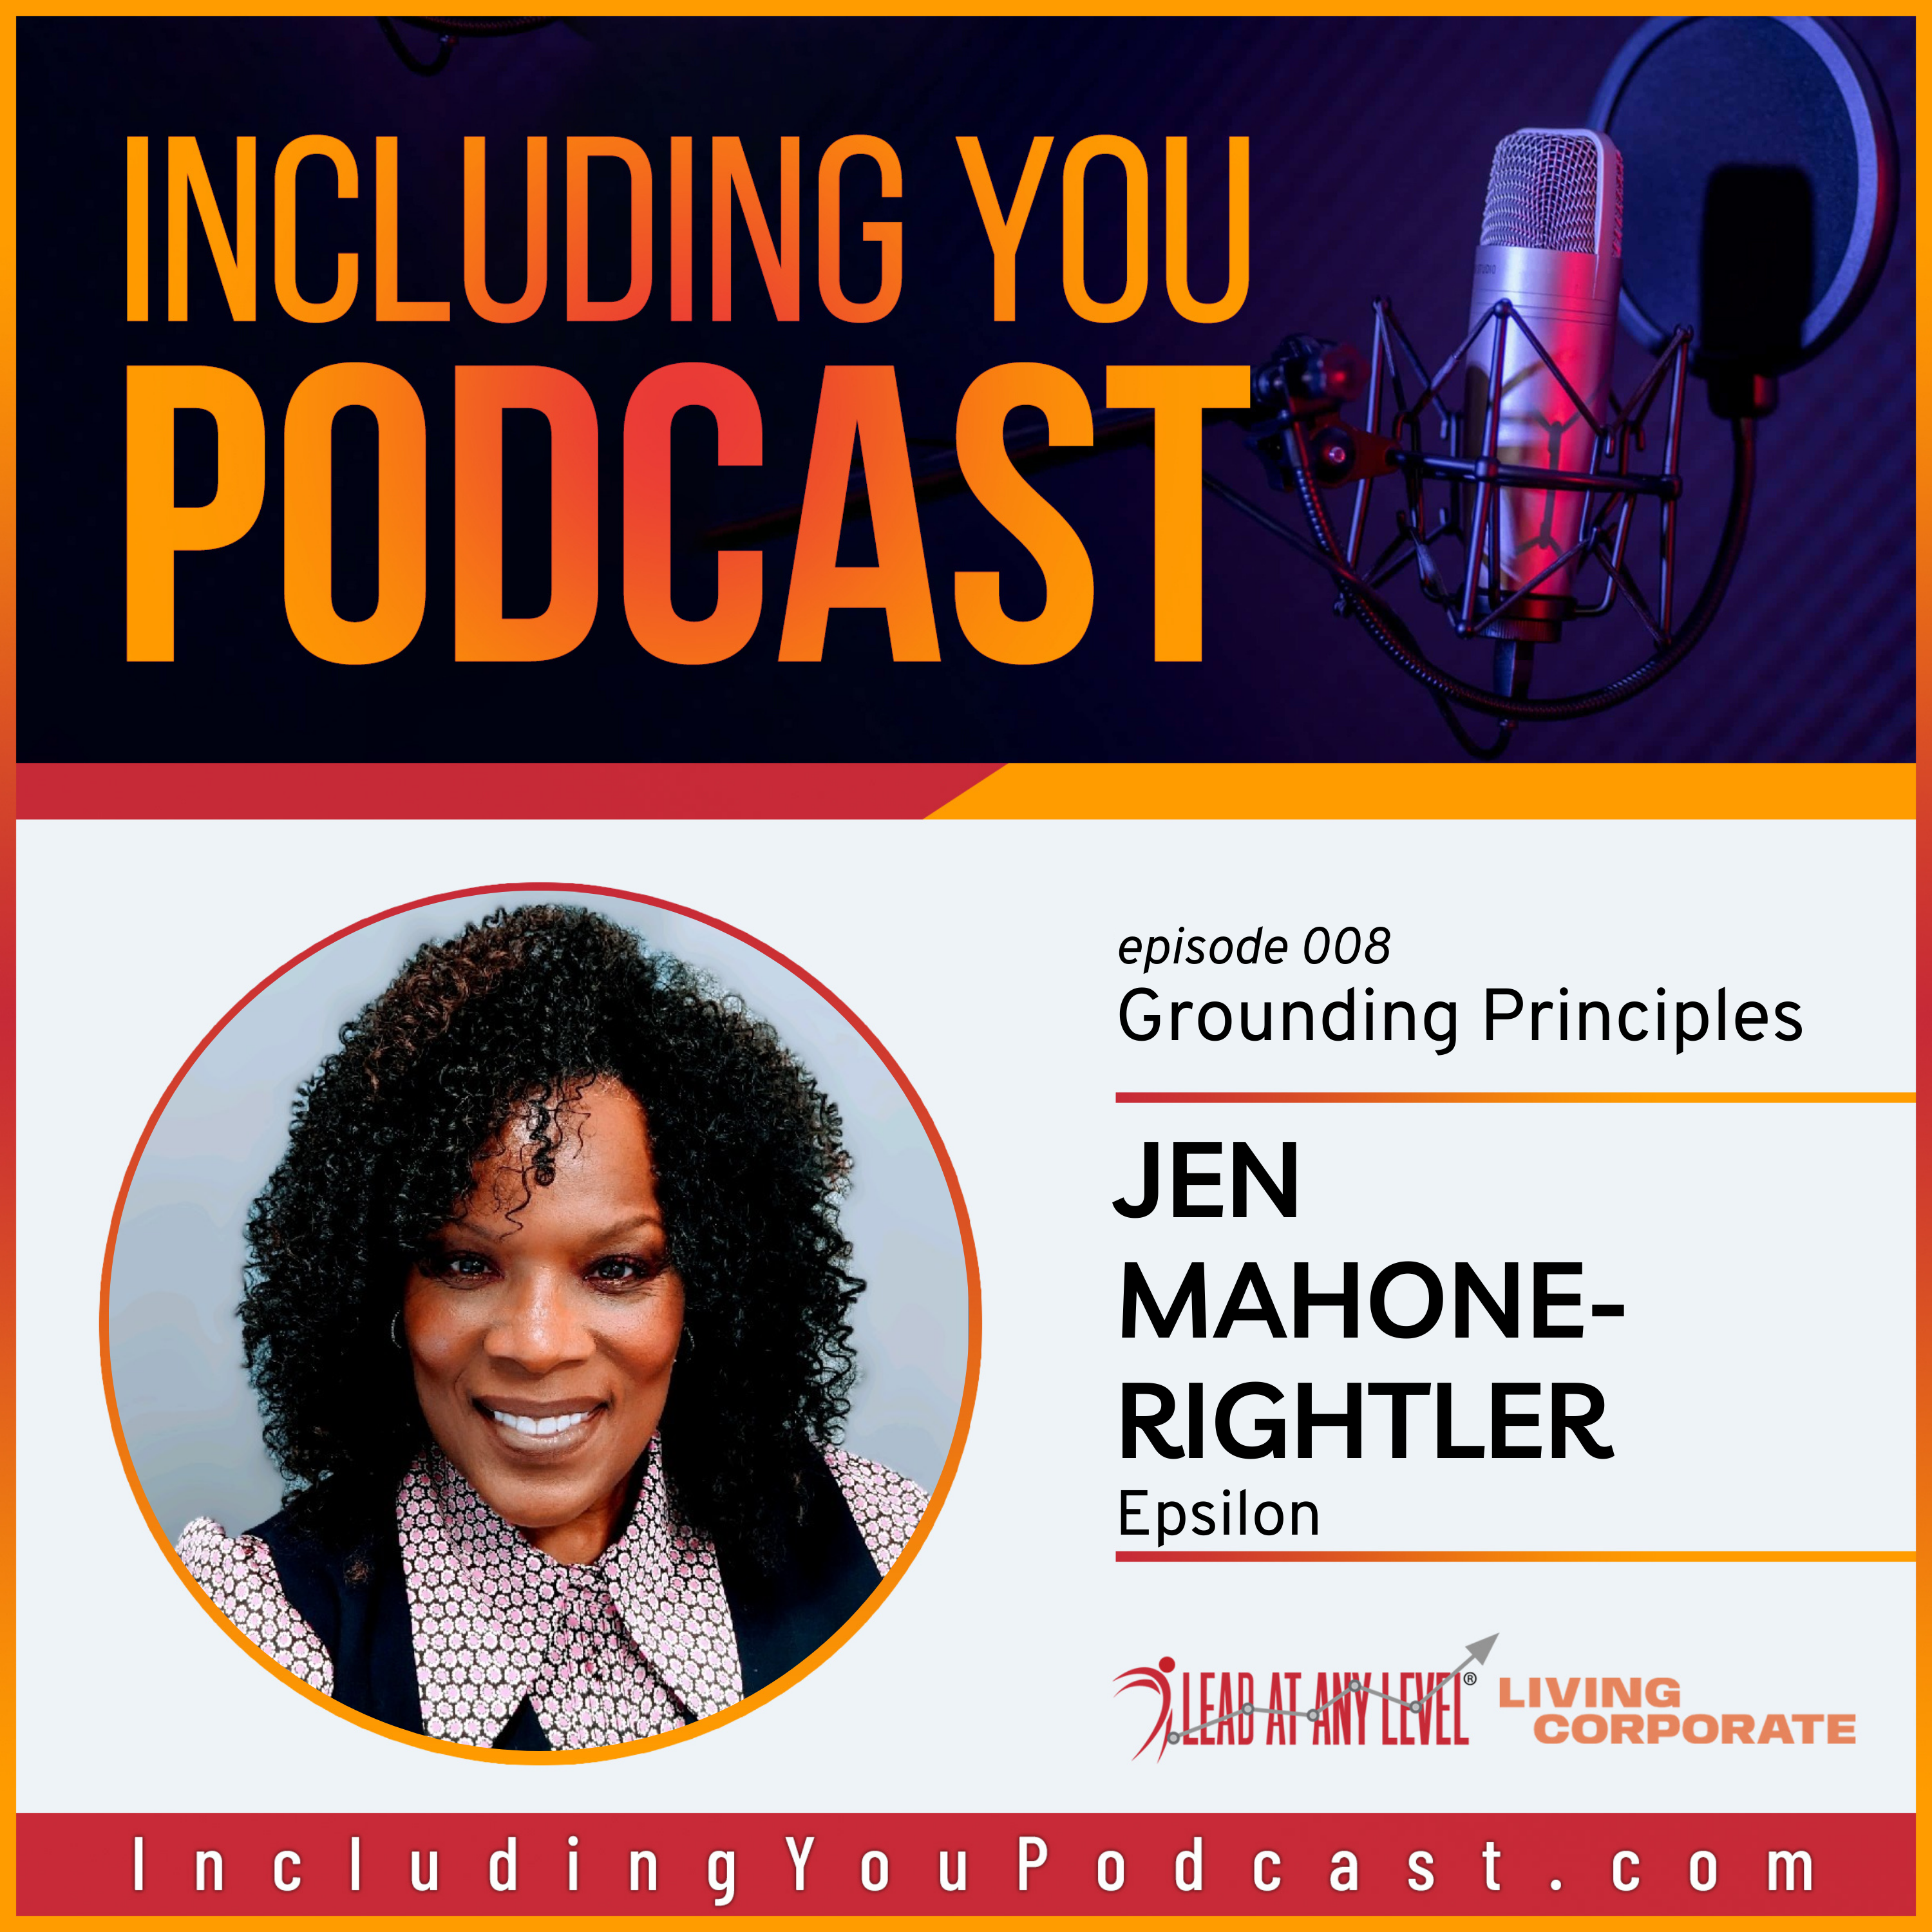 Grounding Principles with Jen Mahone-Rightler (Including You Podcast ep.008)